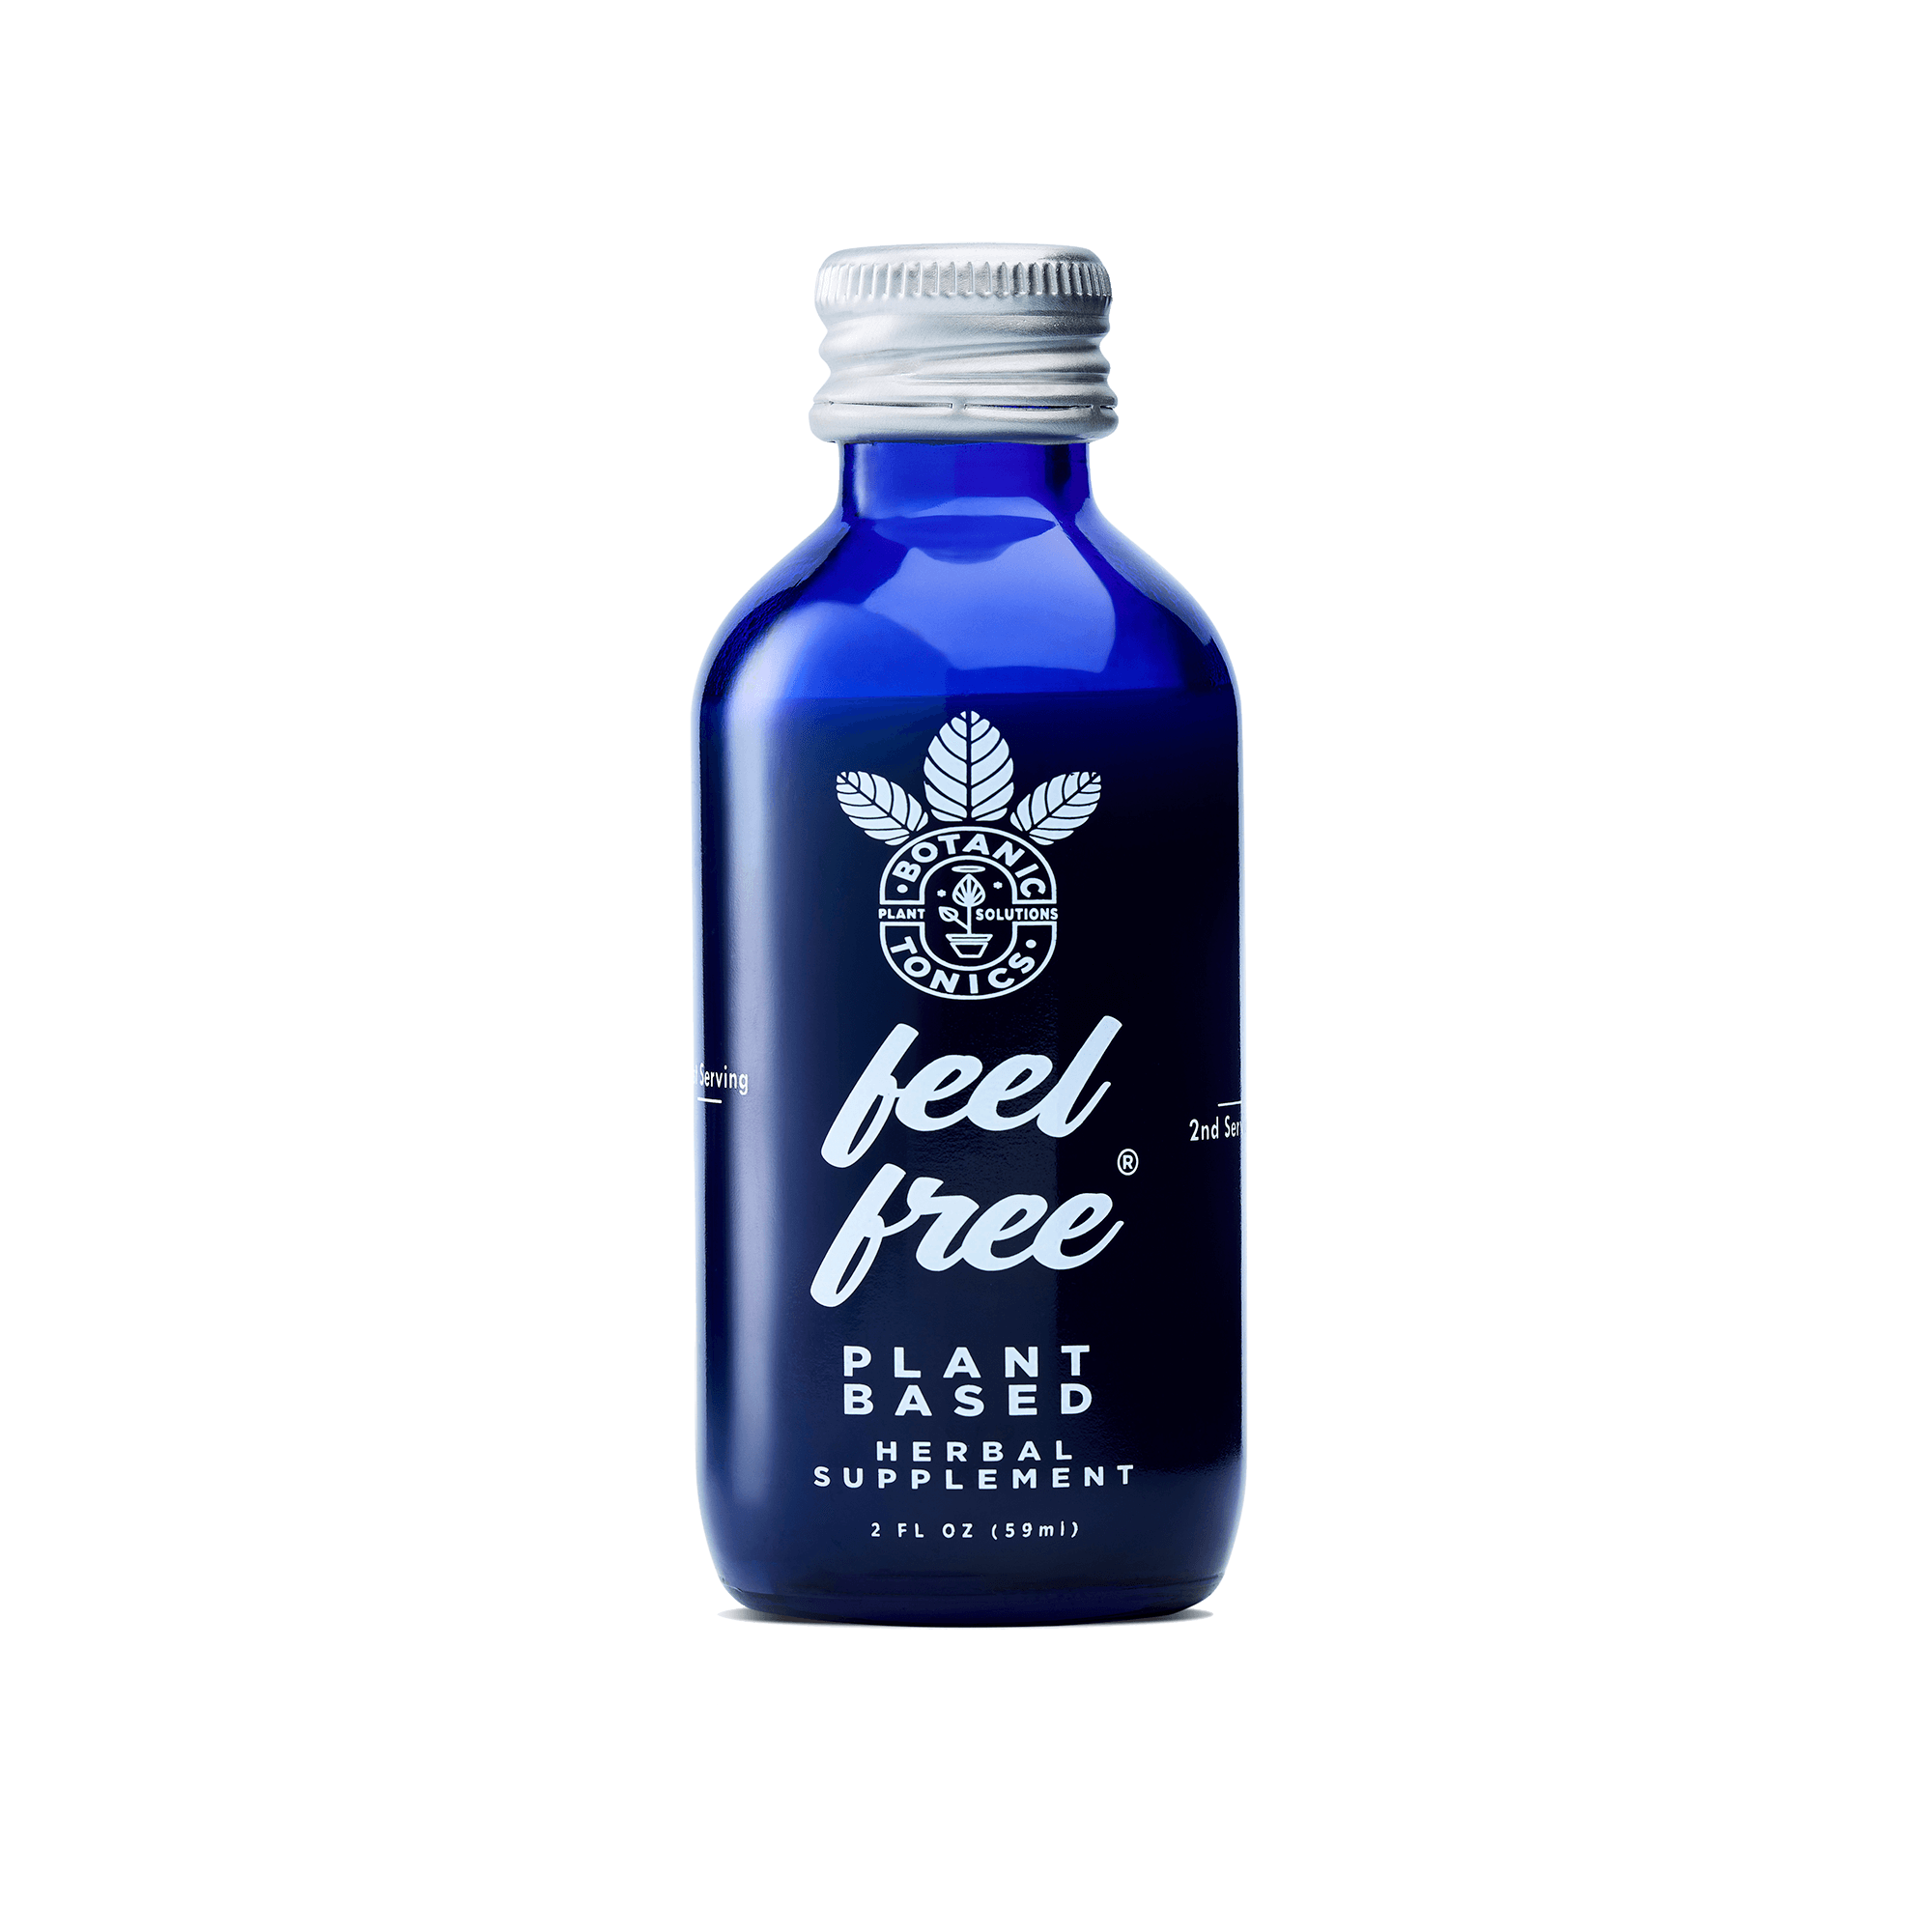 feel free wellness tonic - being held by a hand